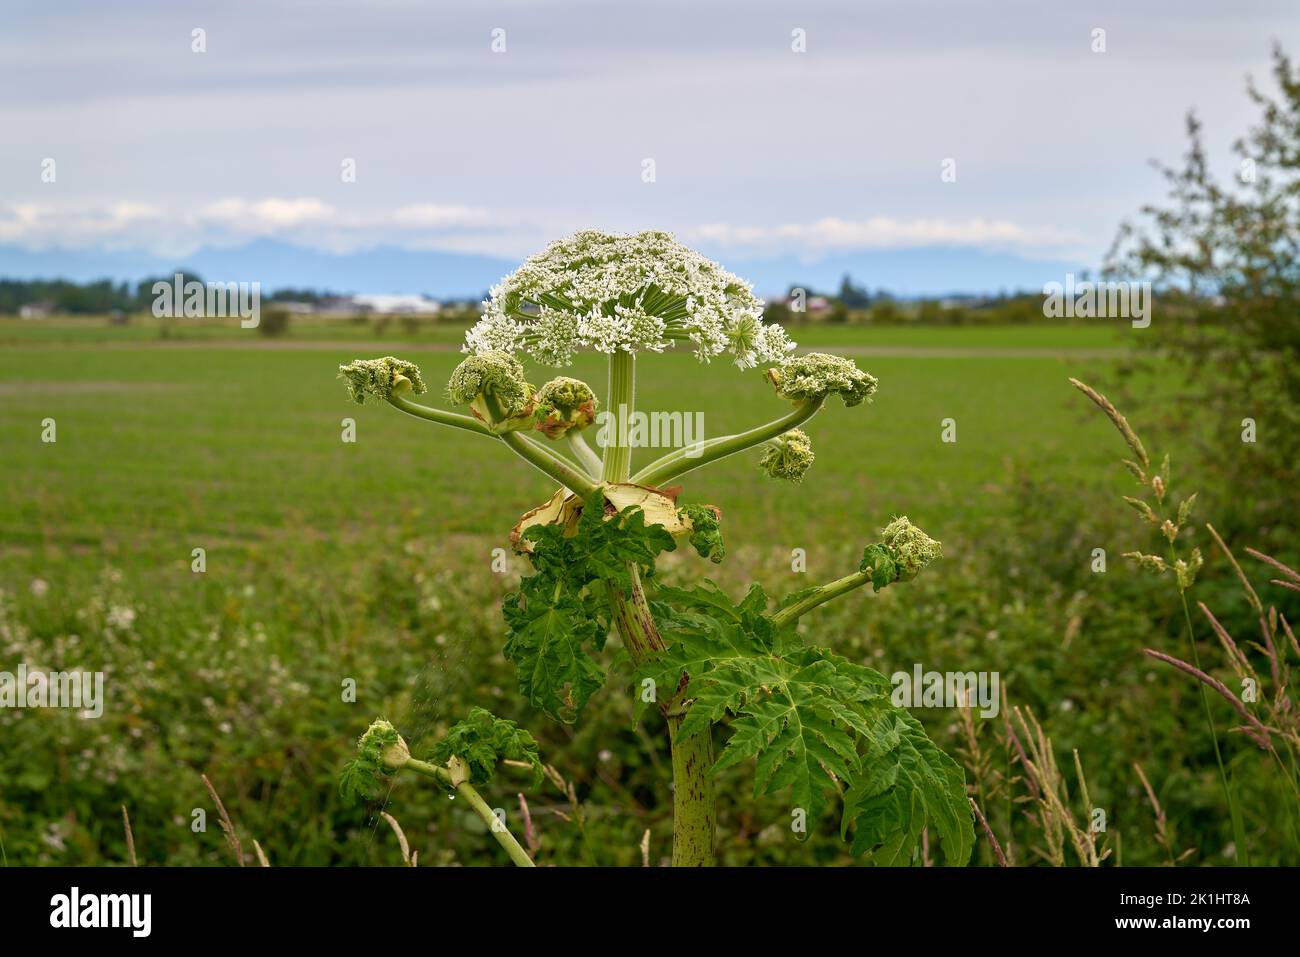 Invasive Plant Giant Hogweed. The top of a dangerous Giant Hogweed which can cause severe burns. Stock Photo